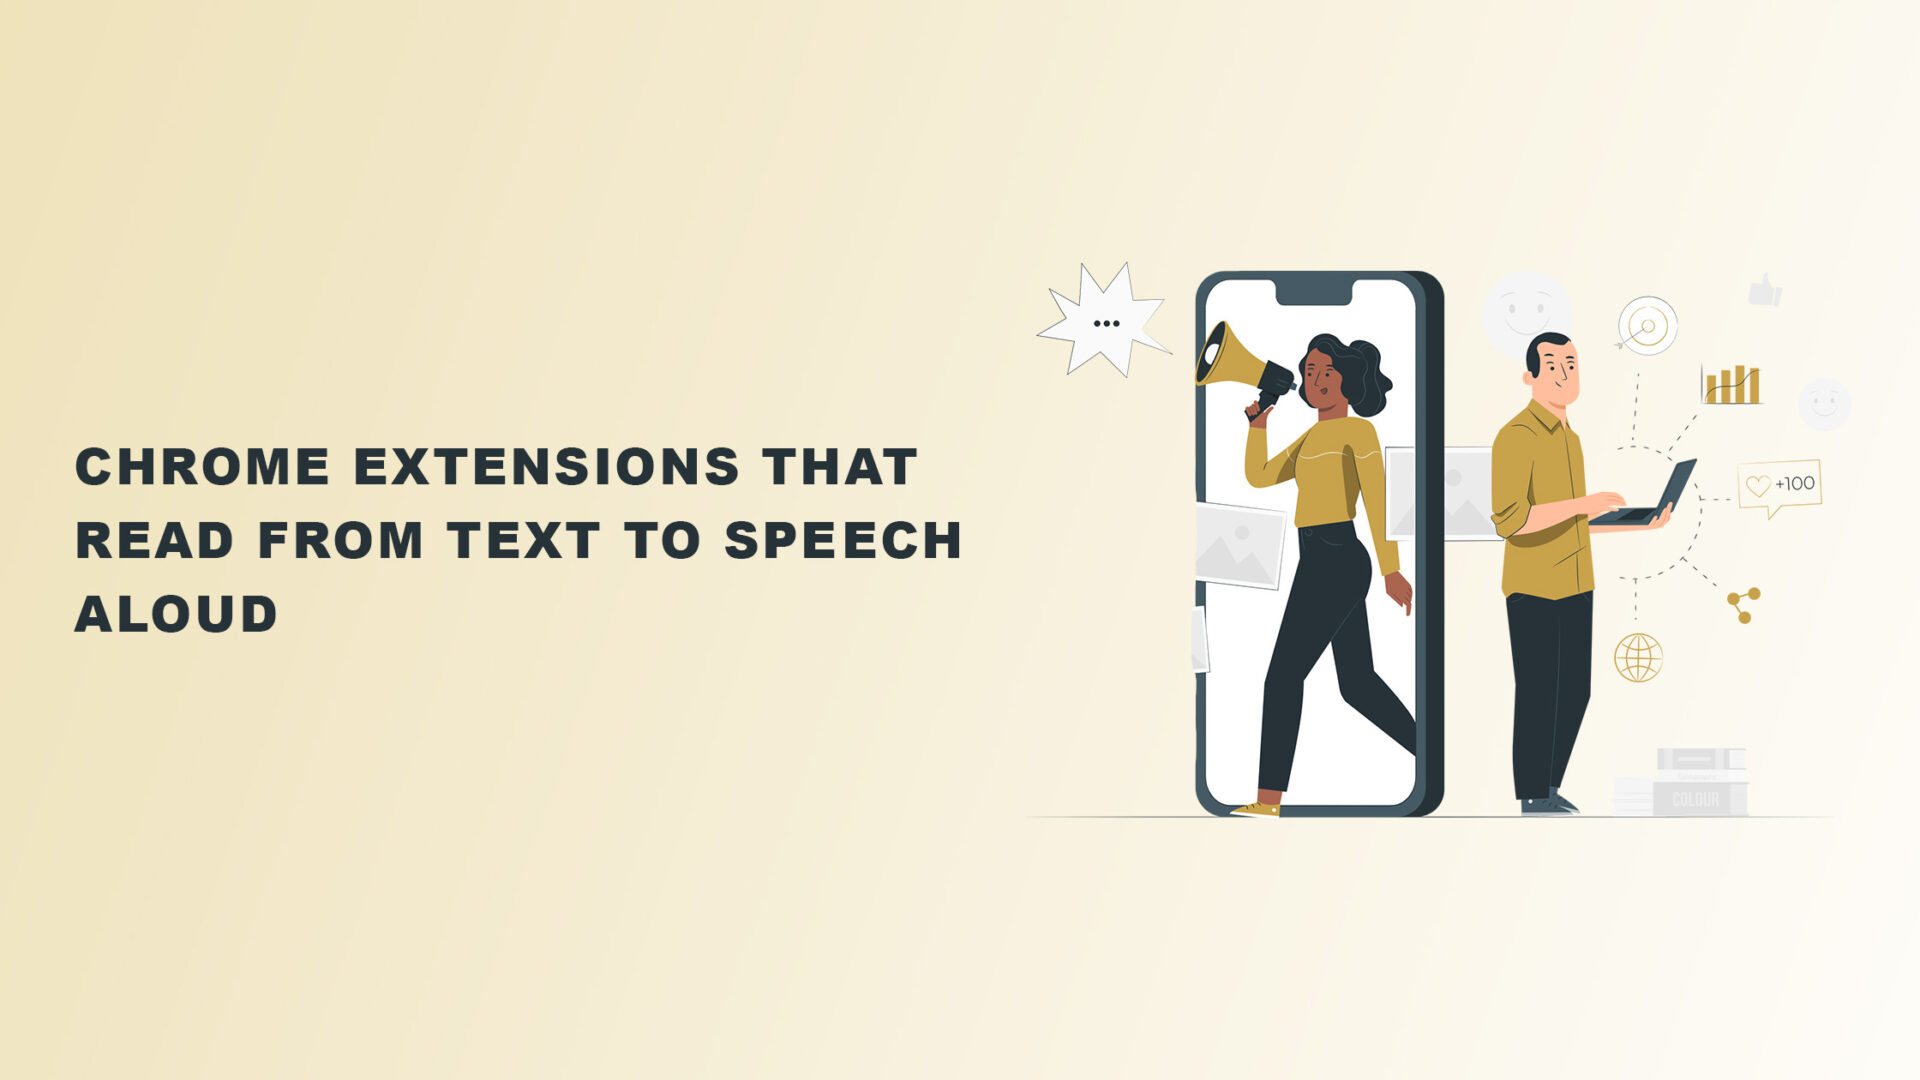 Chrome extensions that read from text to speech aloud